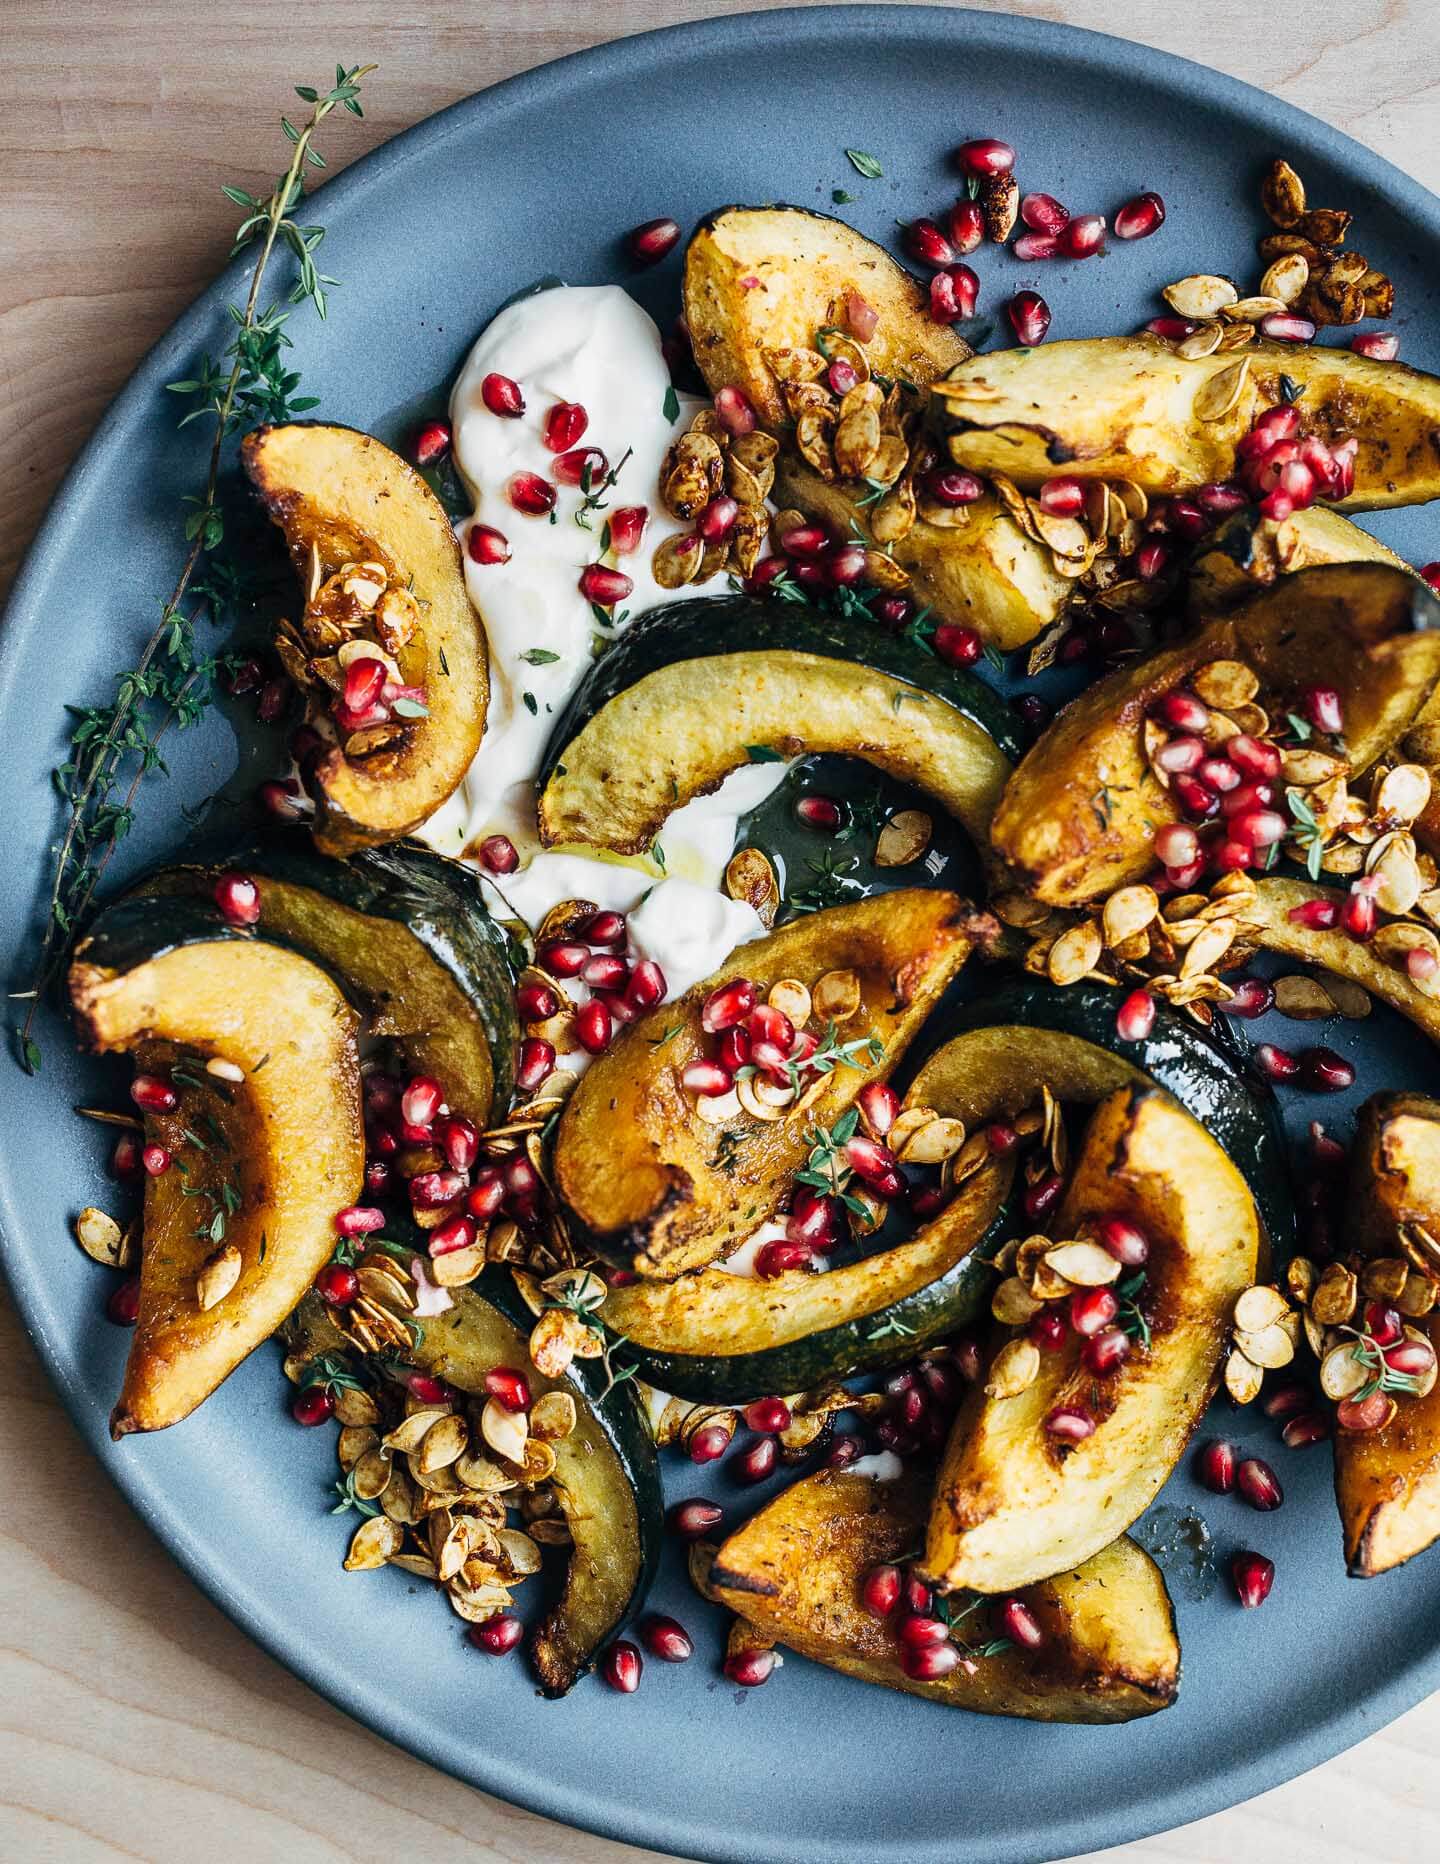 Sweet and savory roasted acorn squash wedges tossed with brown sugar, spicy paprika, black pepper, and fresh thyme. The squash is served with a dollop of crème fraîche, toasted squash seeds, and pomegranate arils.